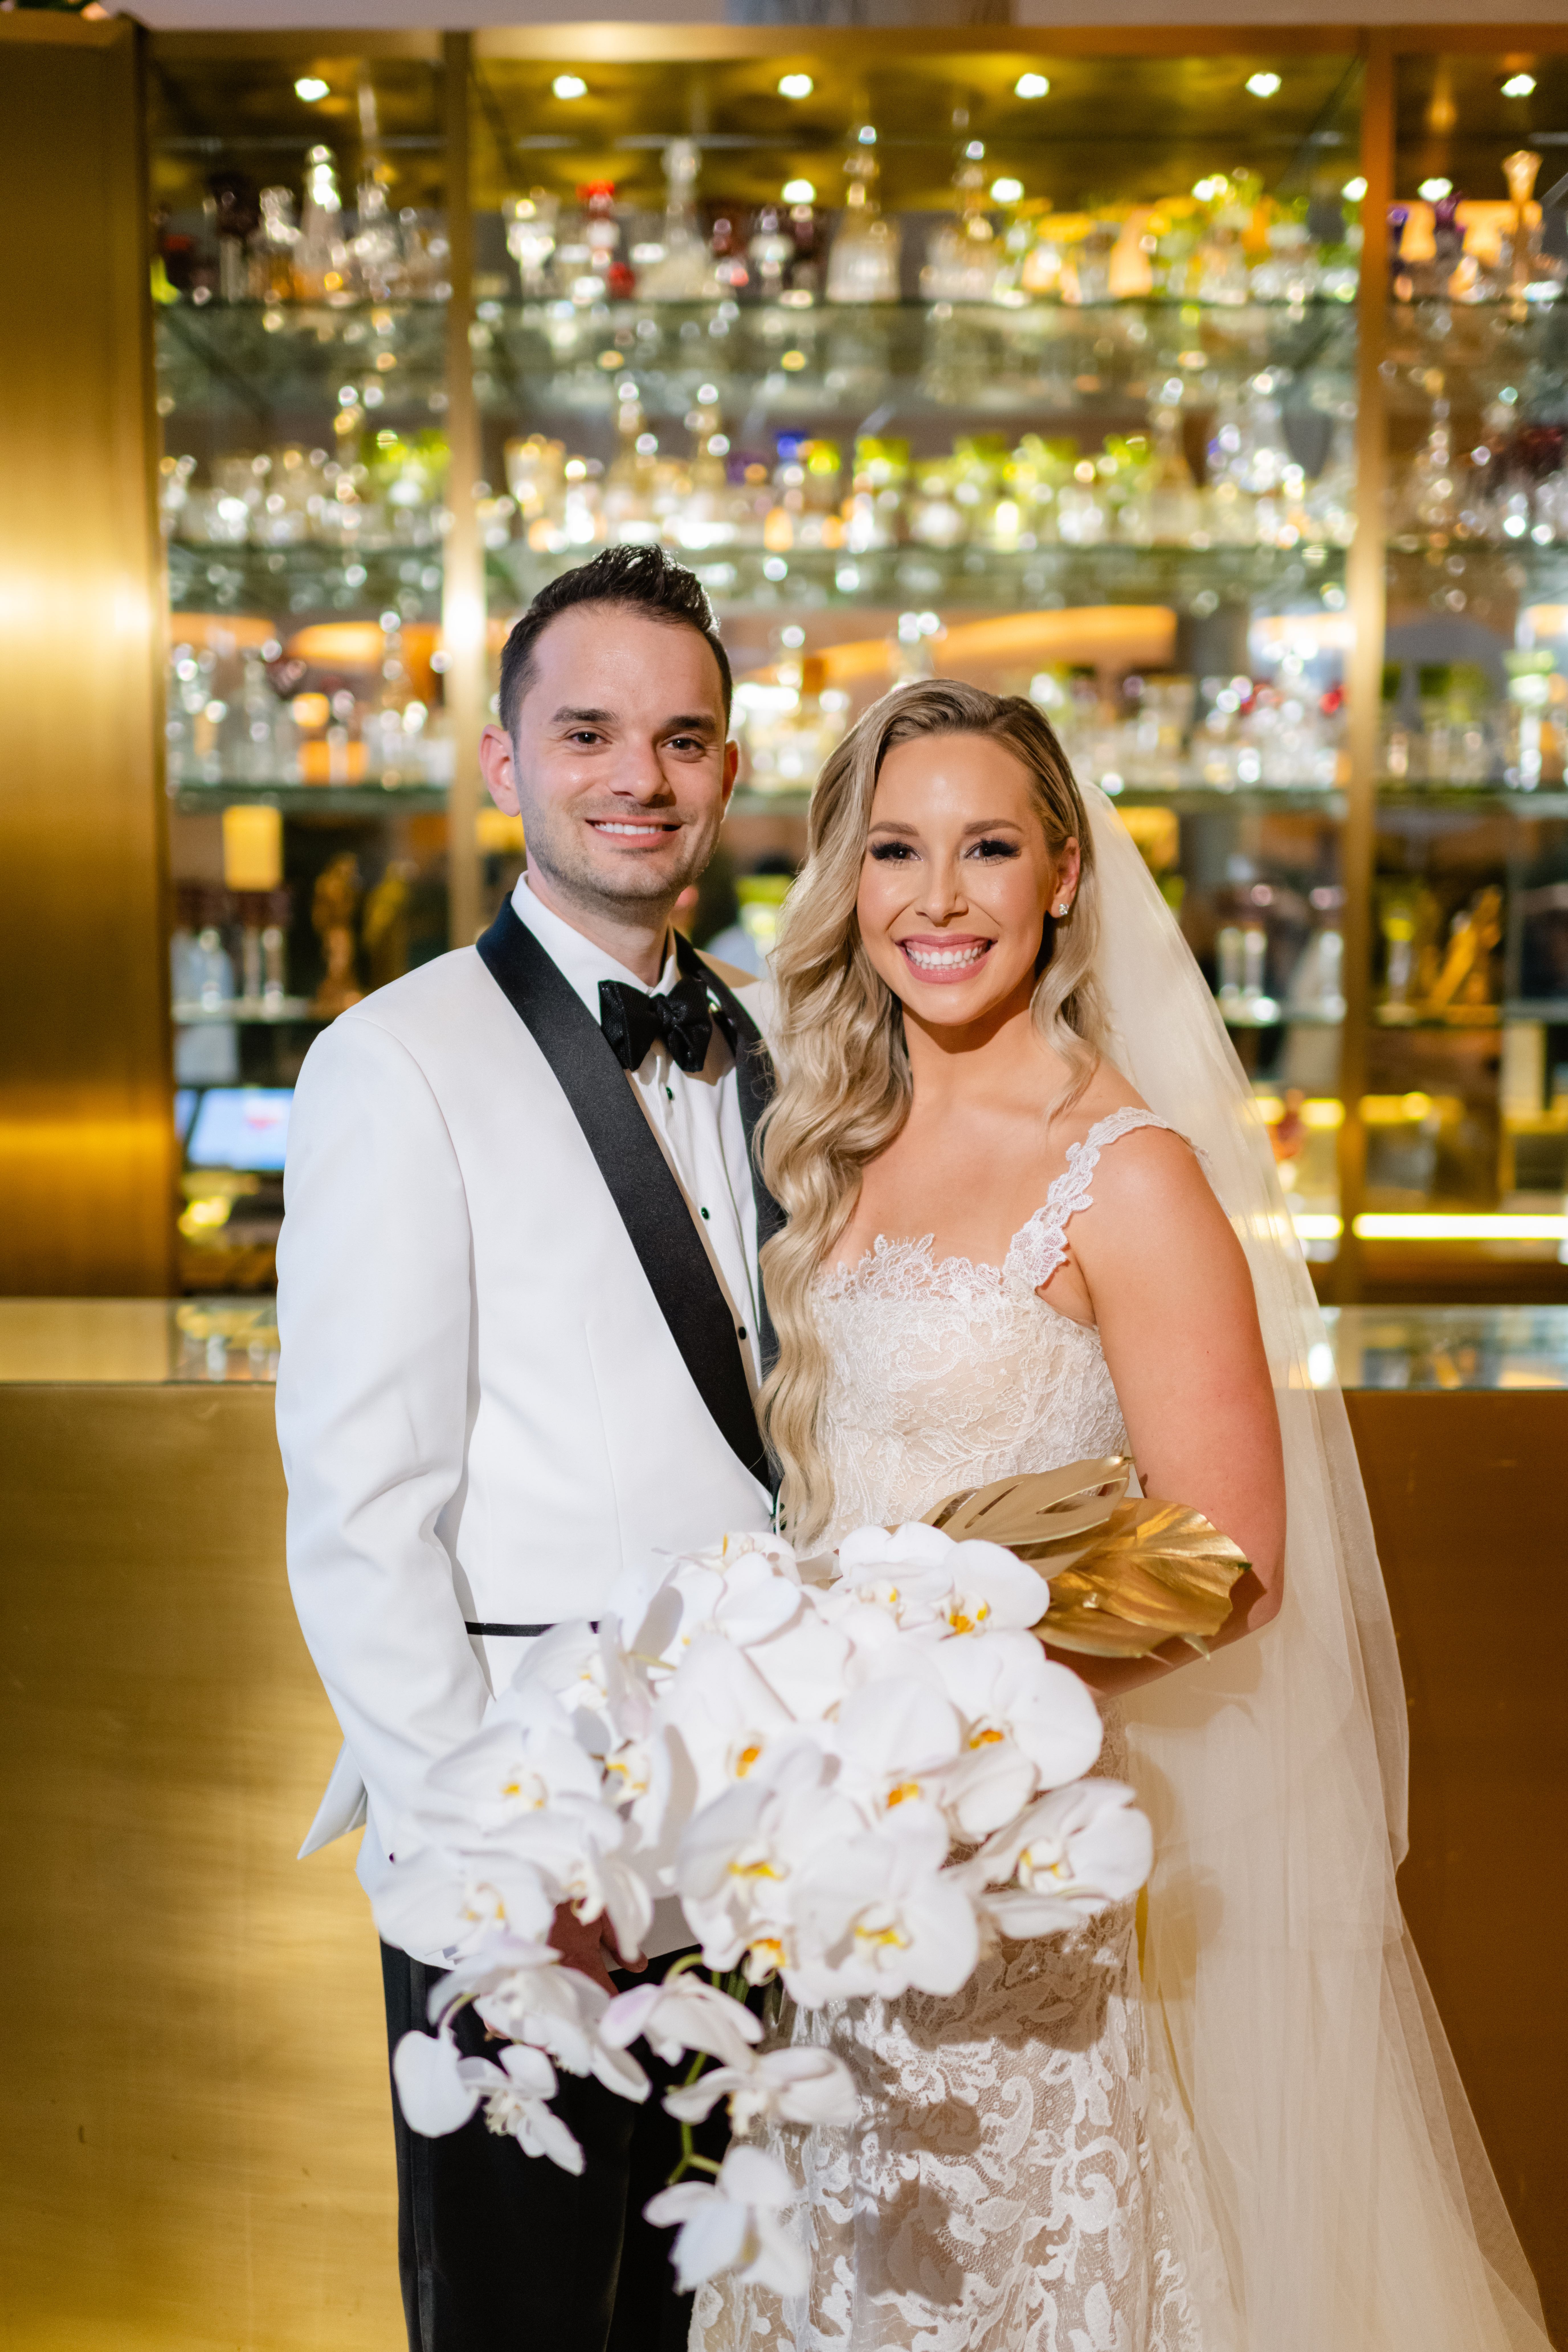 The bride and groom smiling together in front of the bar at The Miami Beach Edition, wedding planned by Oh My Occasions